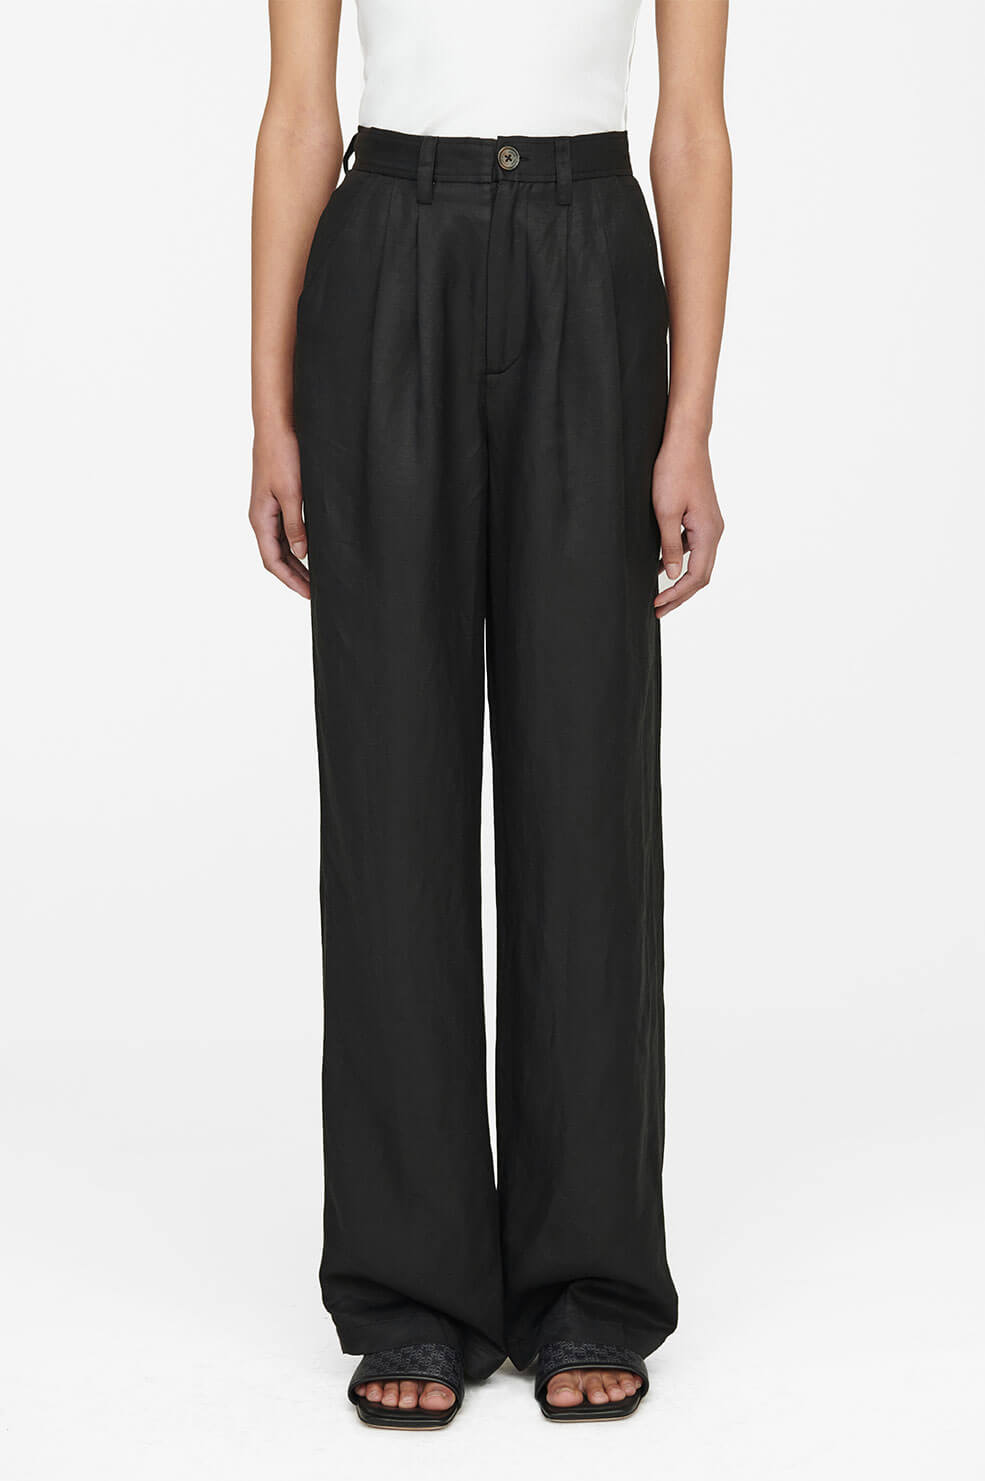 Carrie Pant